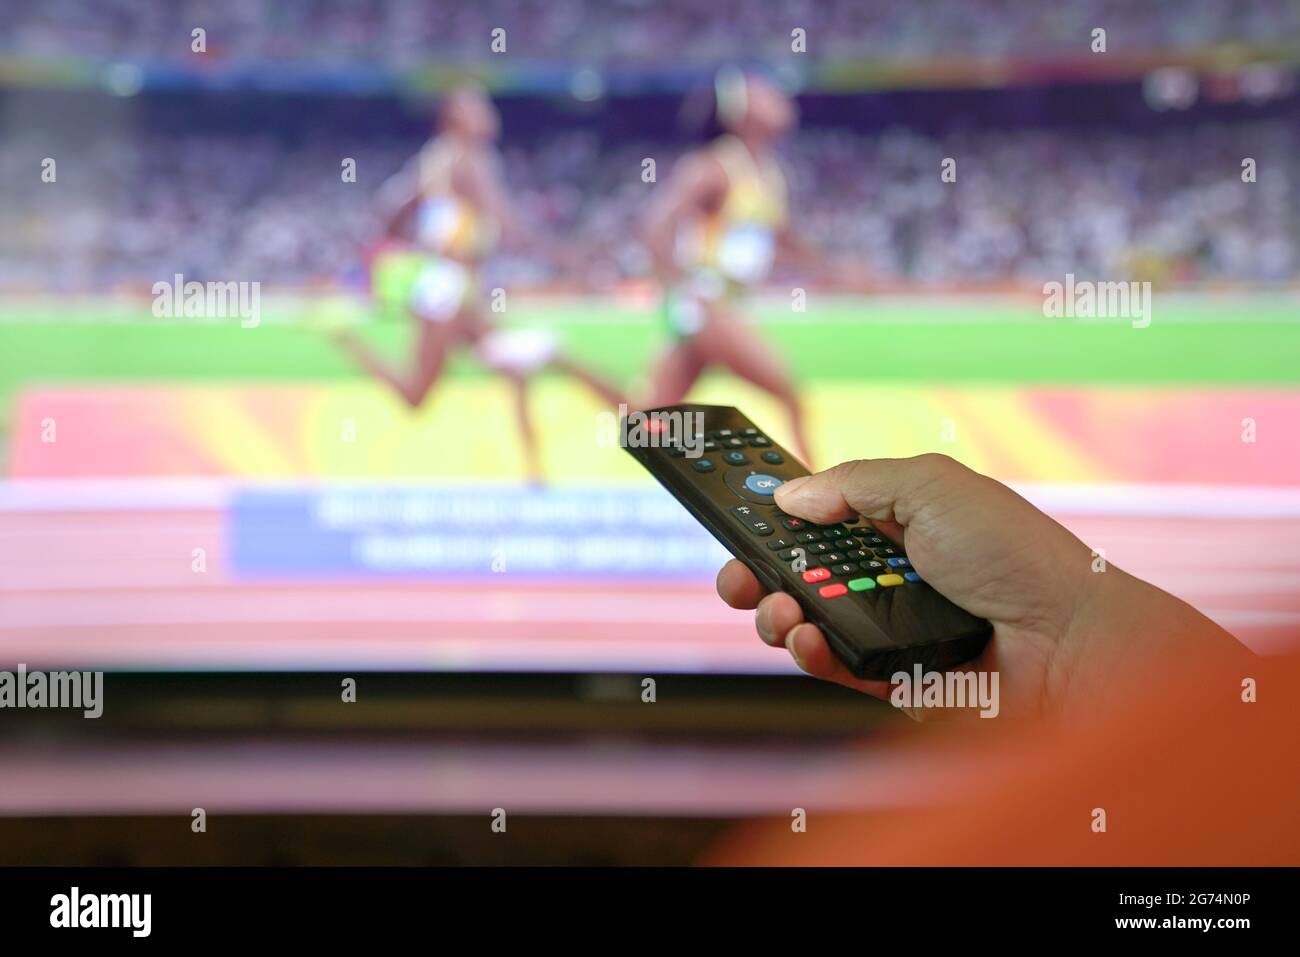 Man watch sports track and field on tv. Close up view on remote control. Stock Photo